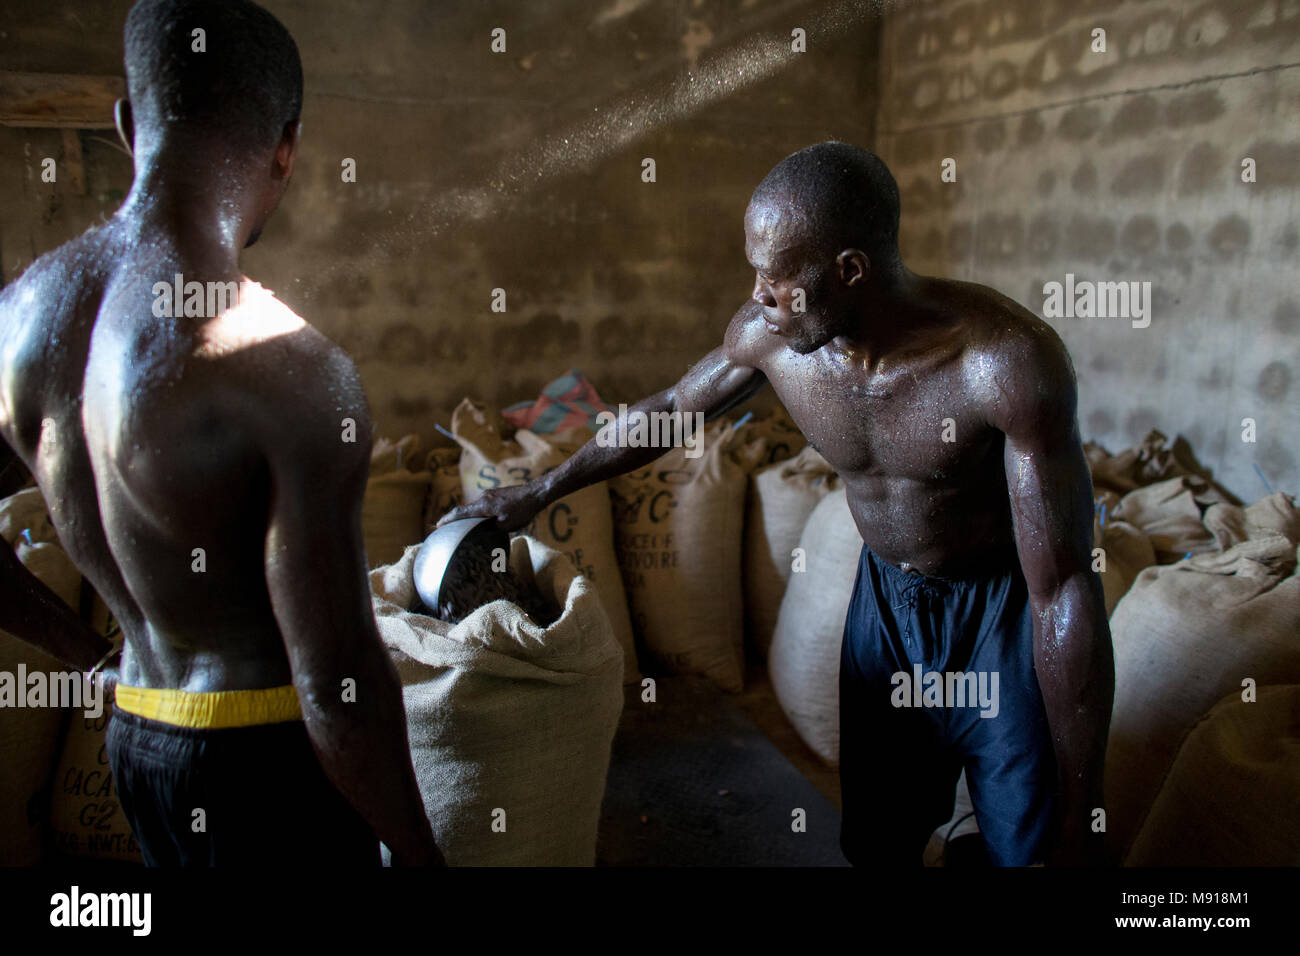 Ivory Coast. Workers filling and weighing cocoa bags. Stock Photo